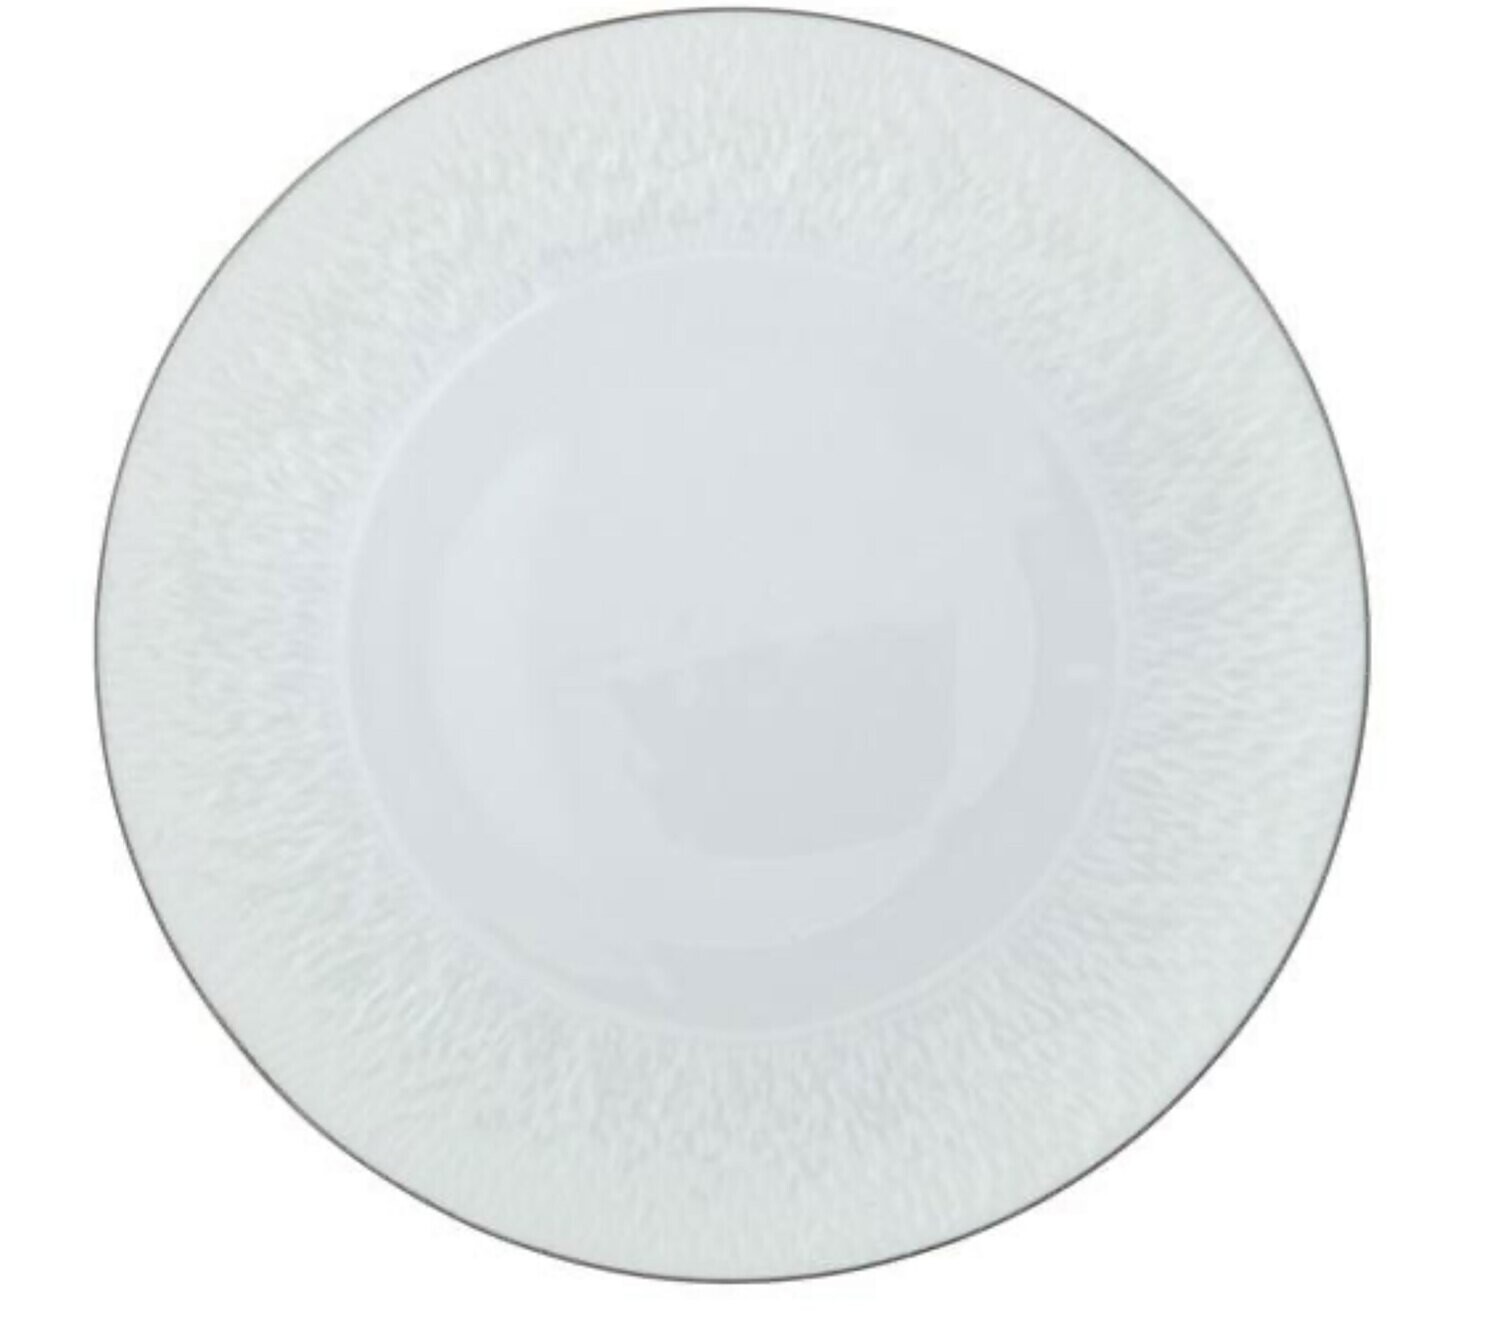 Raynaud Limoges Mineral Filet Platinum Deep plate with engraved rim 10.6 in 0349-21-250027